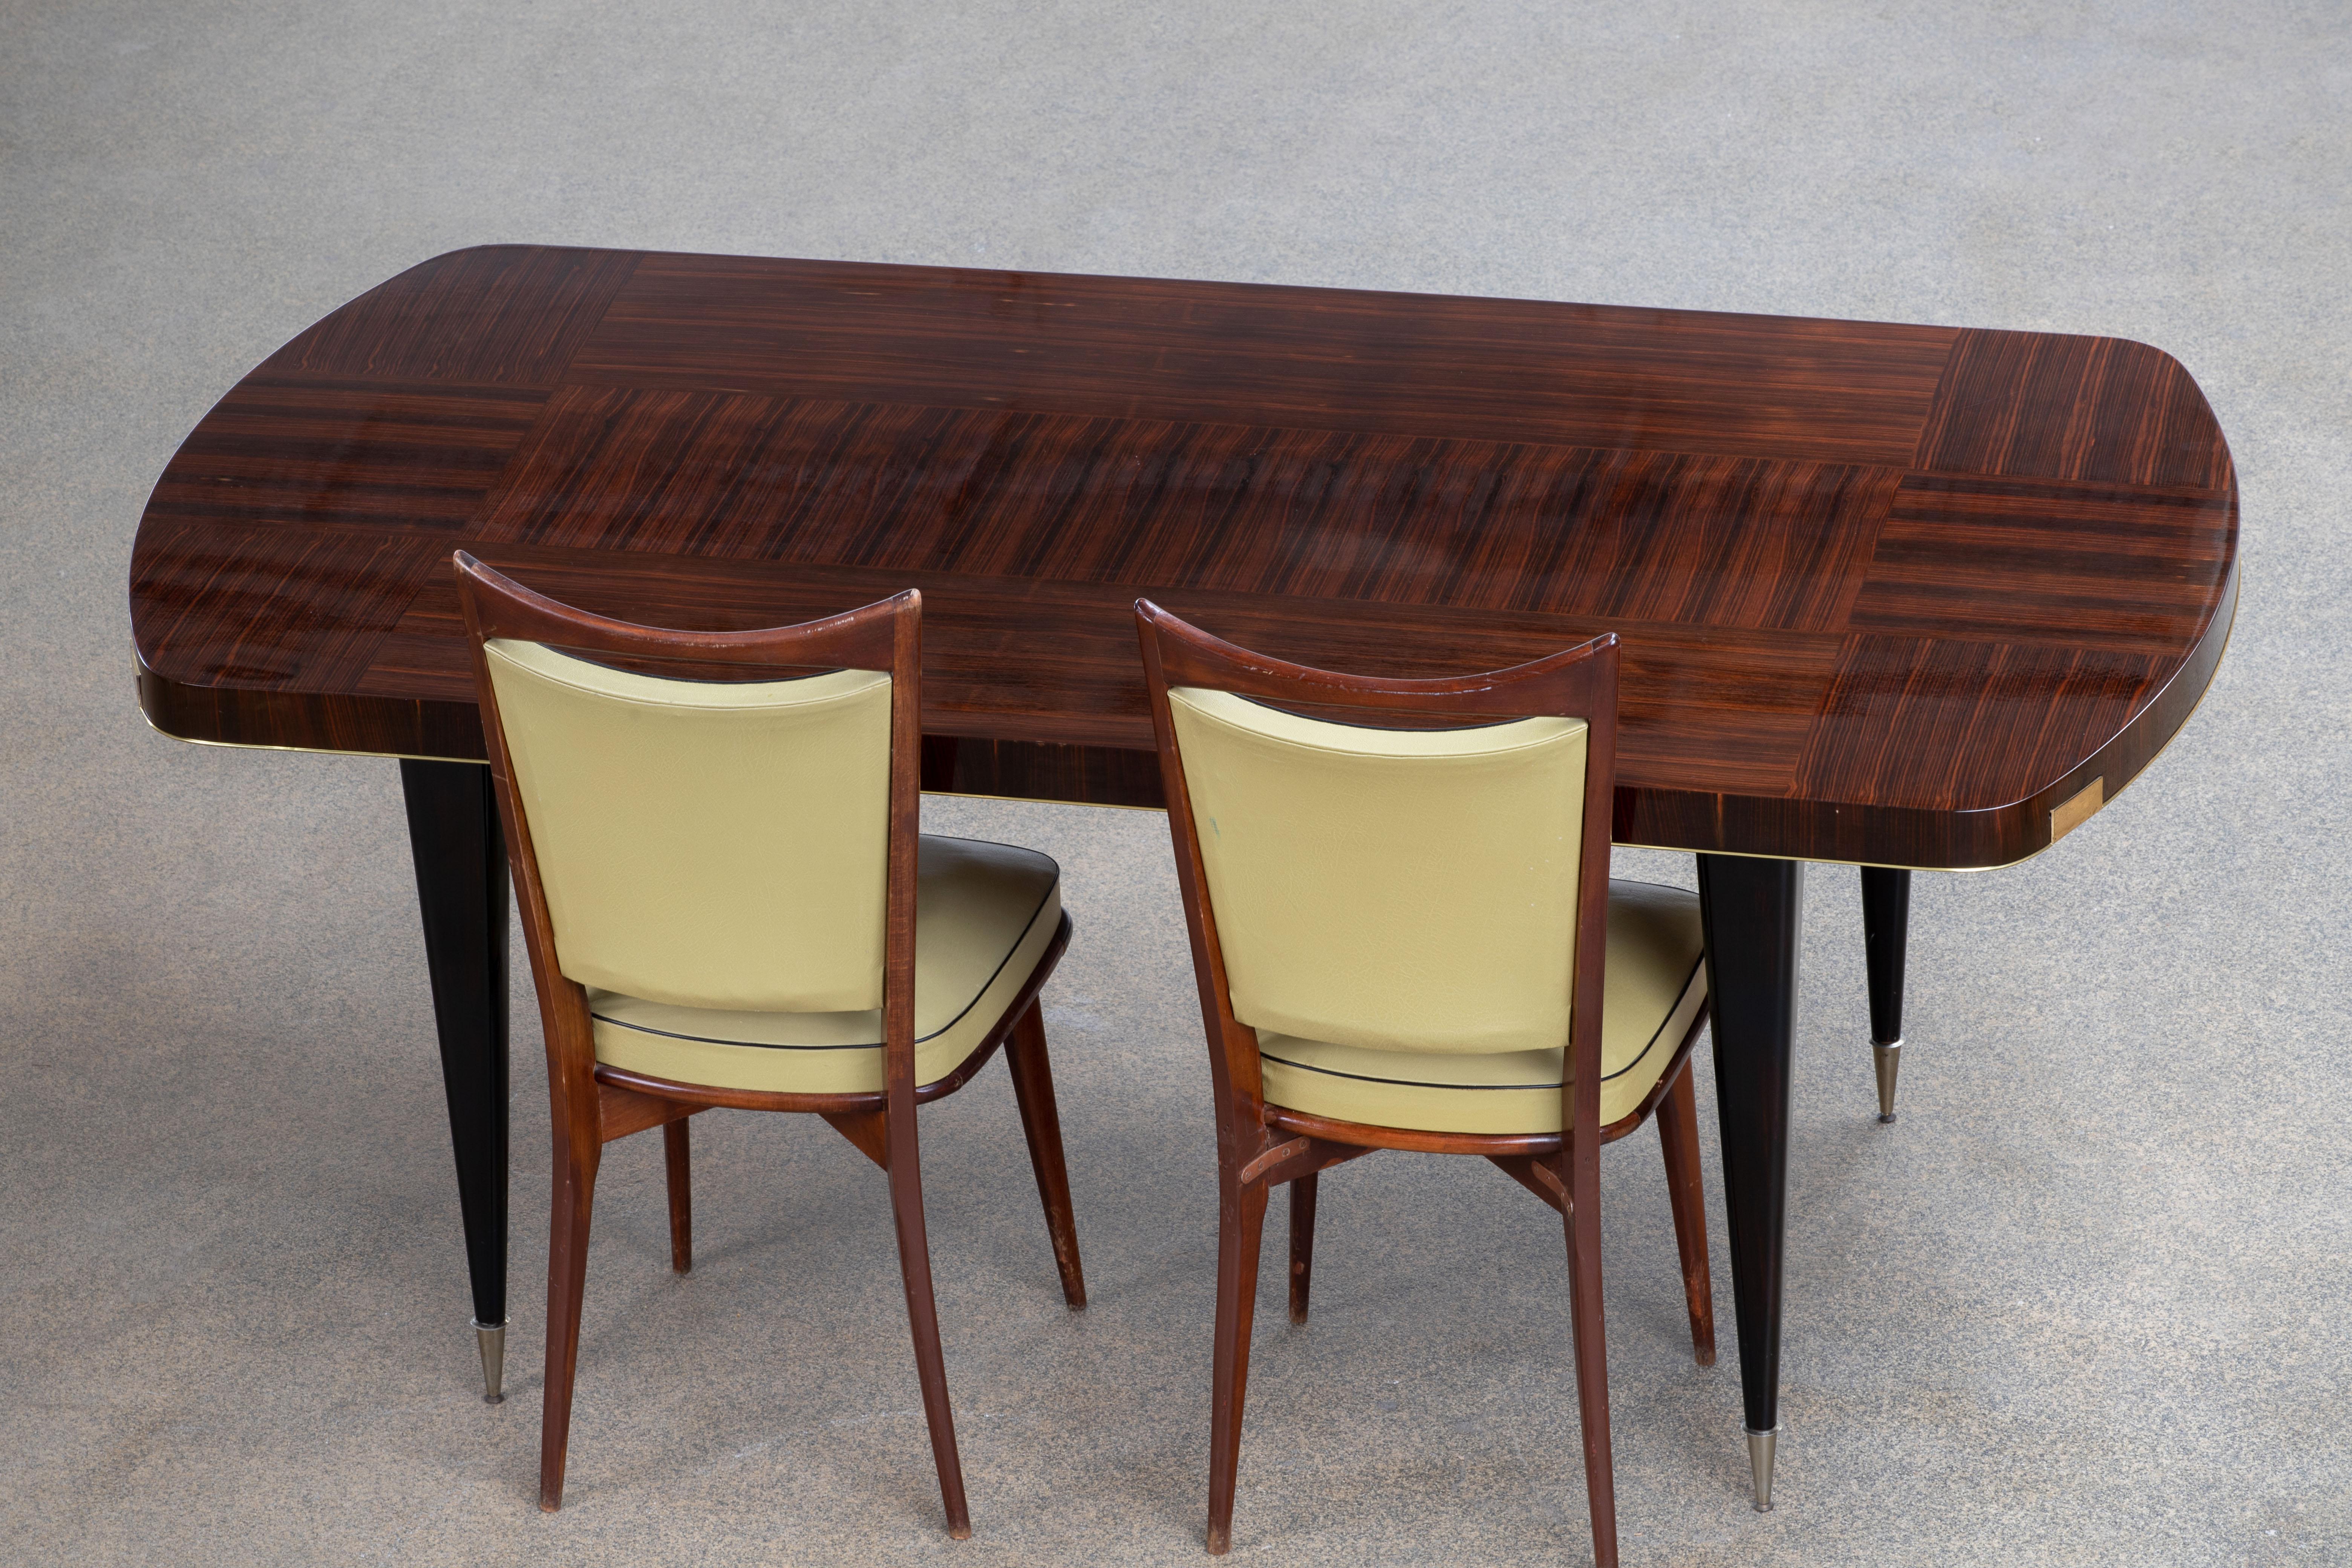 20th Century French Art Deco Brutalist Table, Macassar, 1940s For Sale